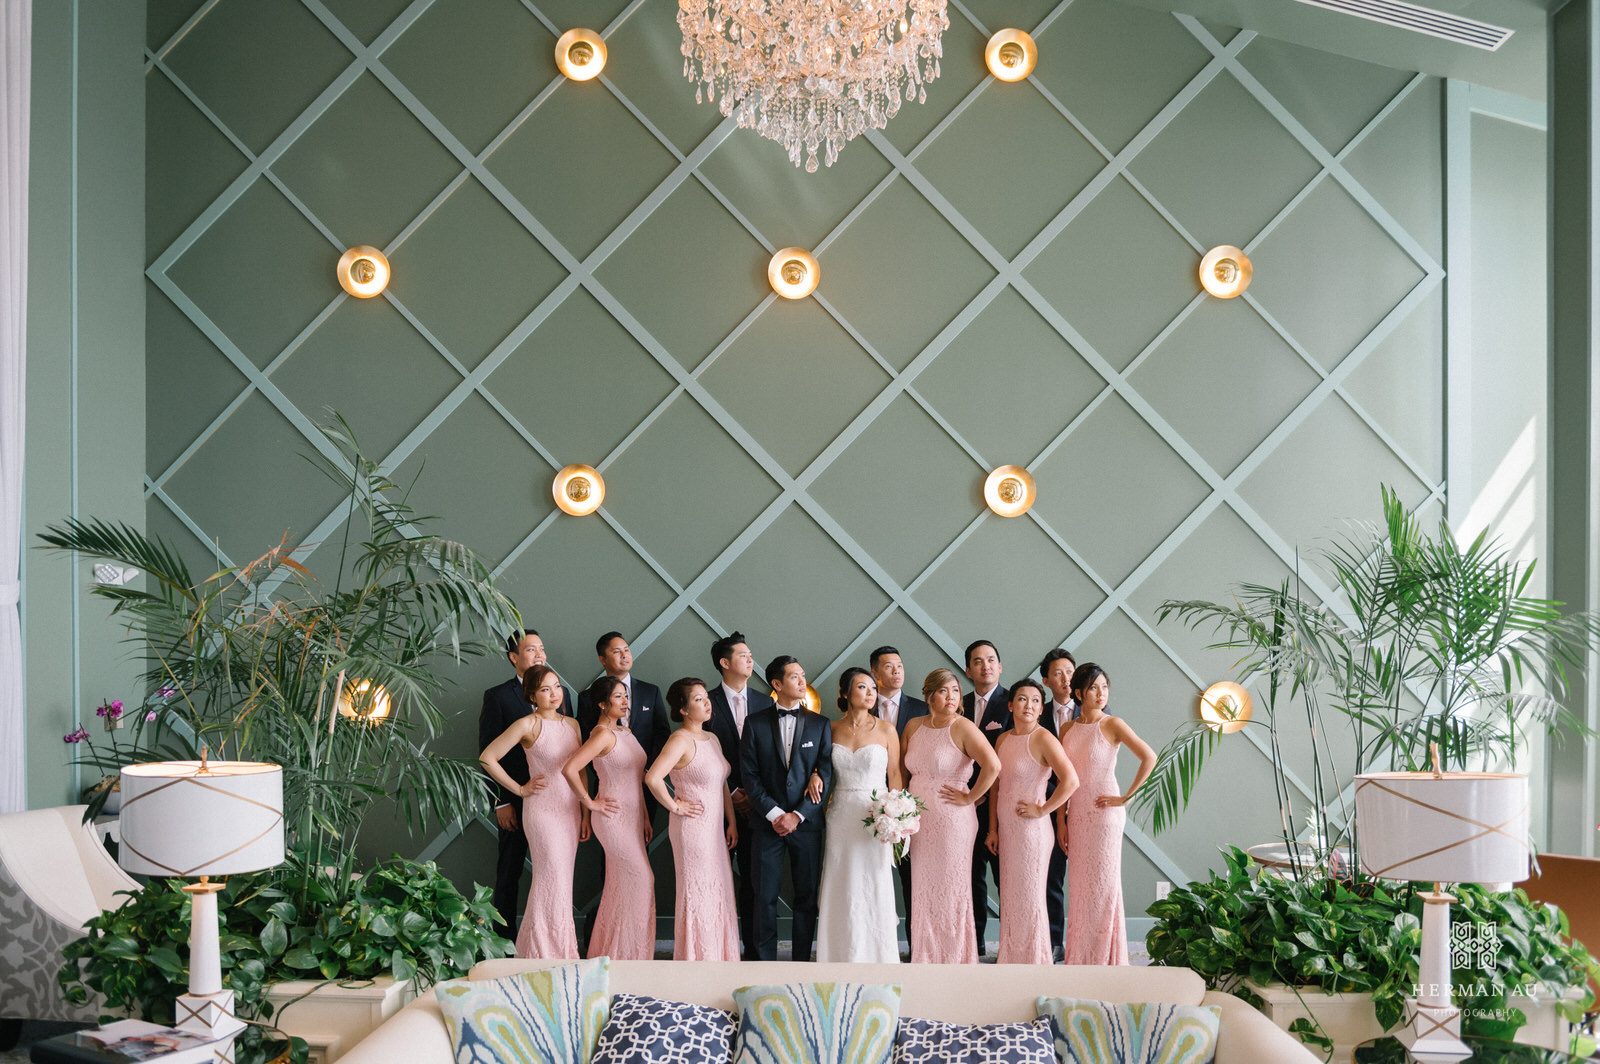 The entire bridal party looking off to the side with their hands on their hips